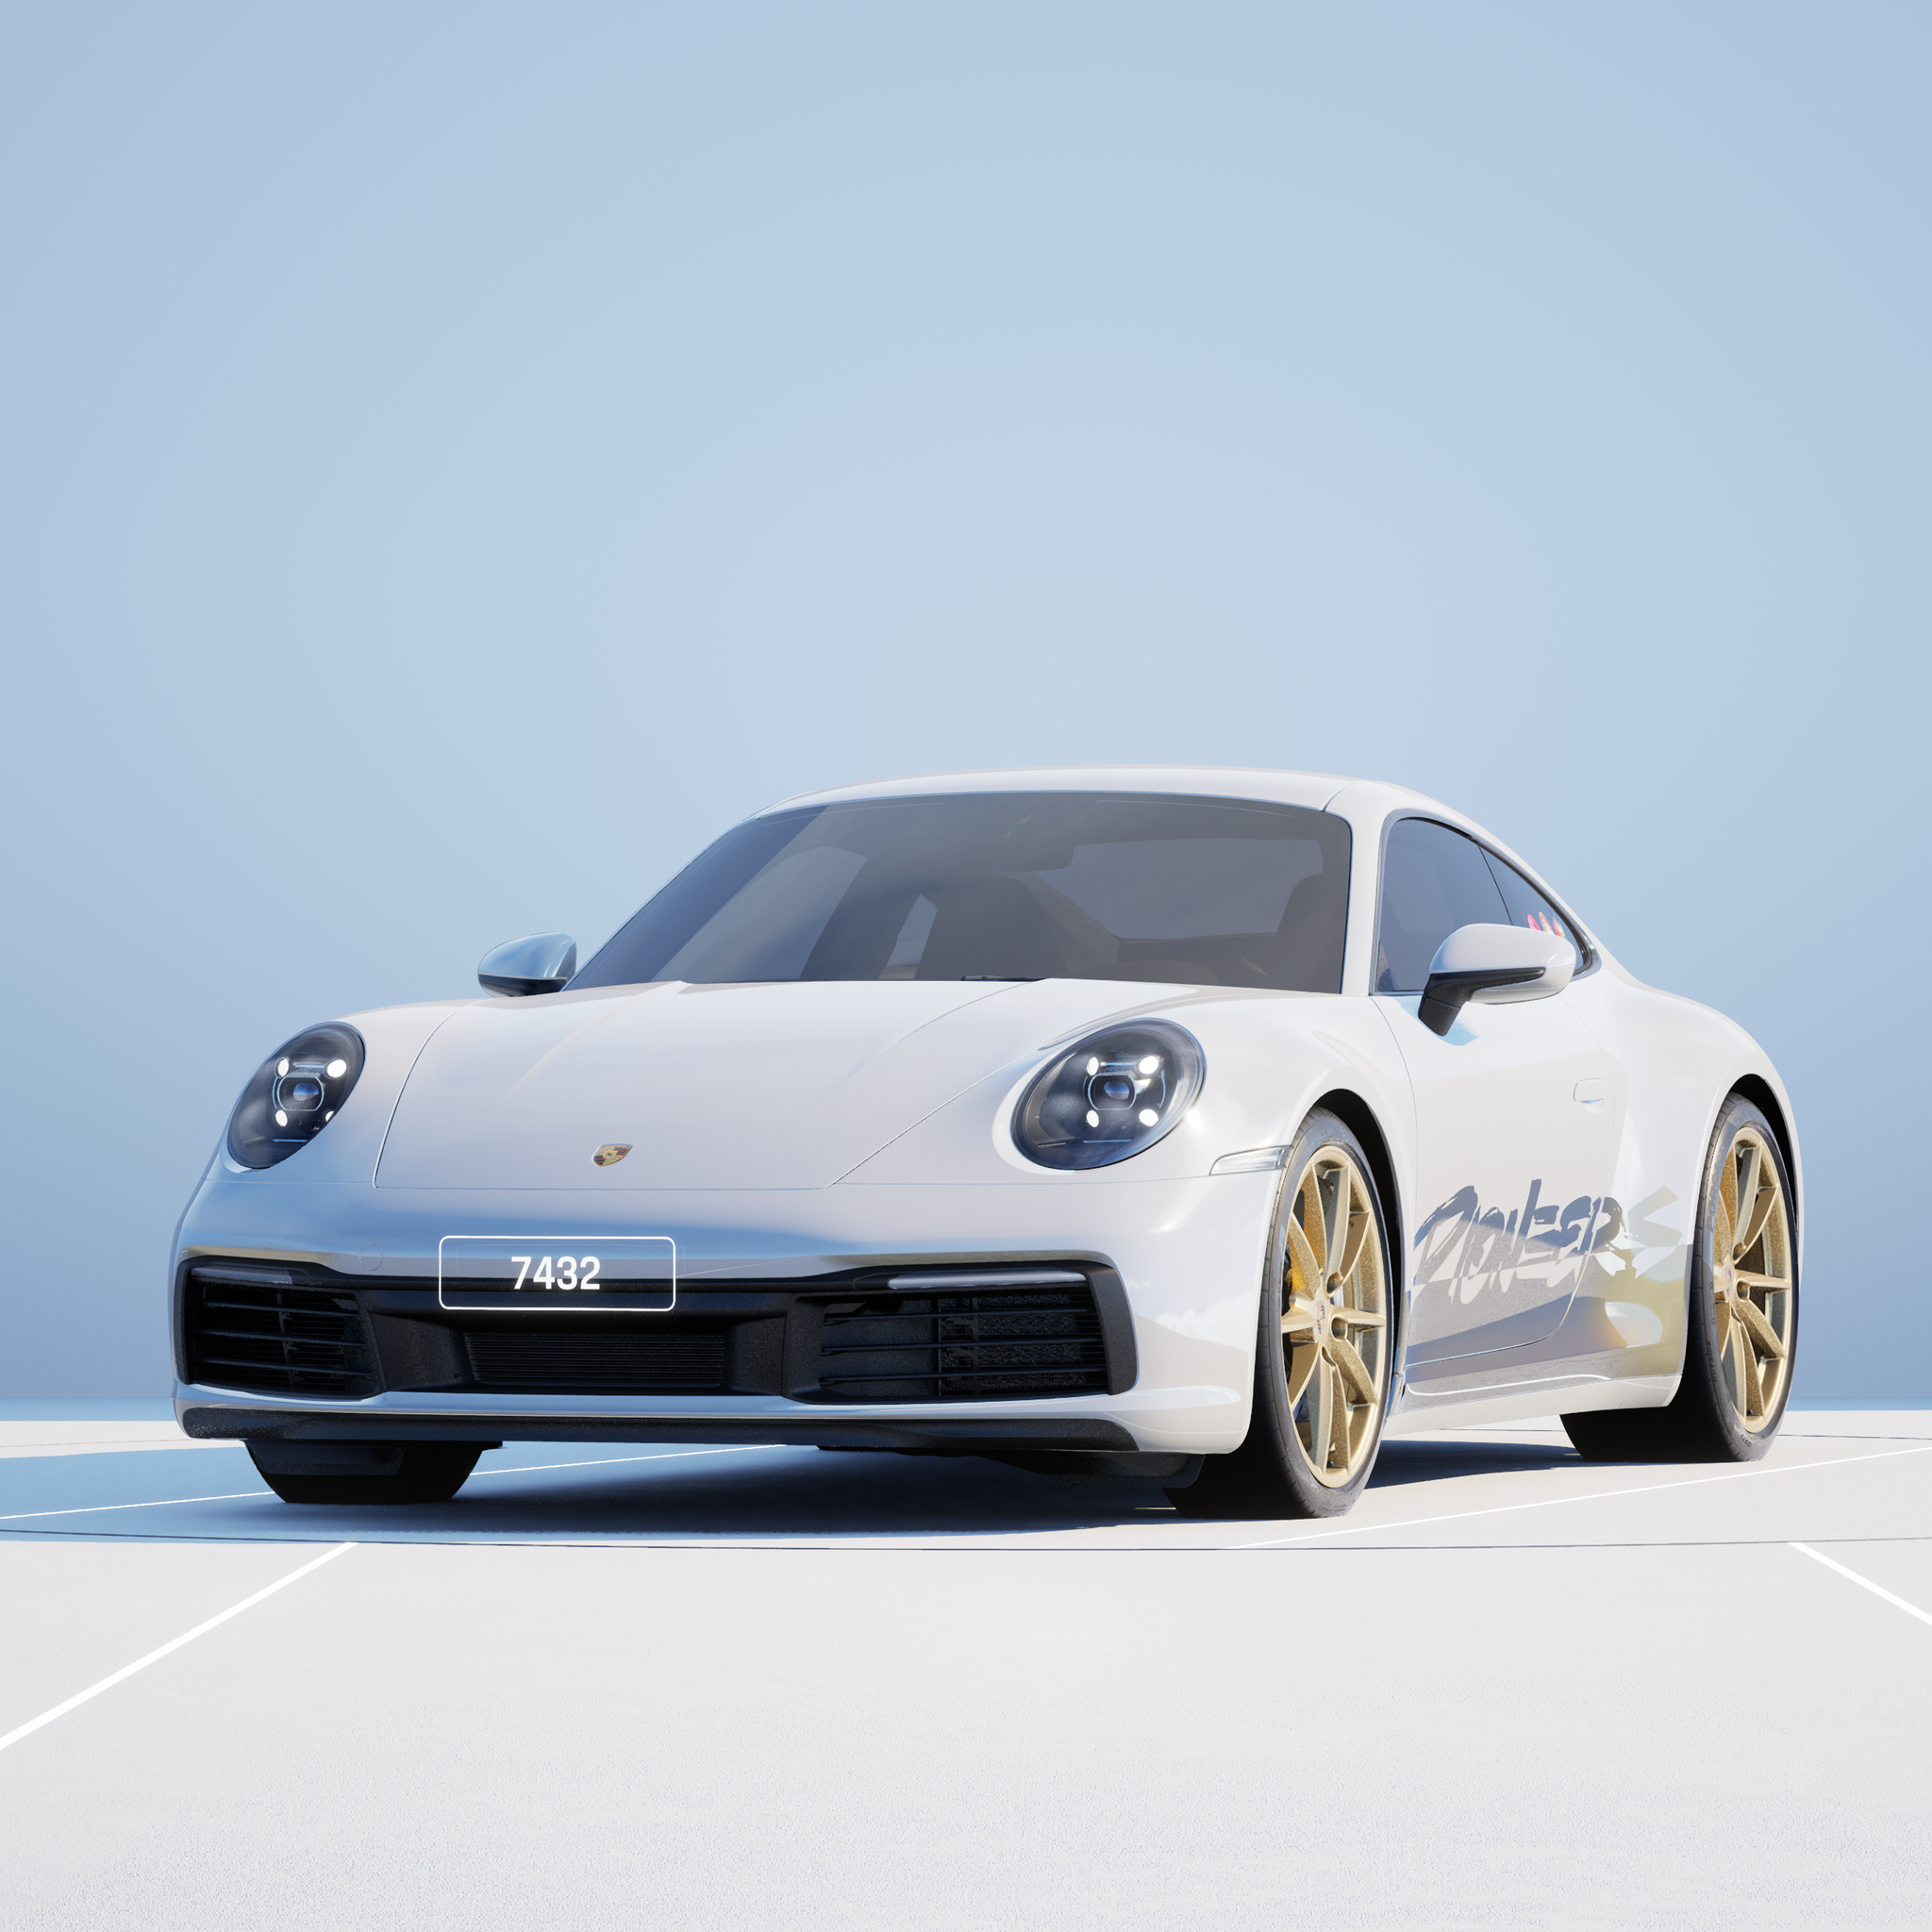 The PORSCHΞ 911 7432 image in phase